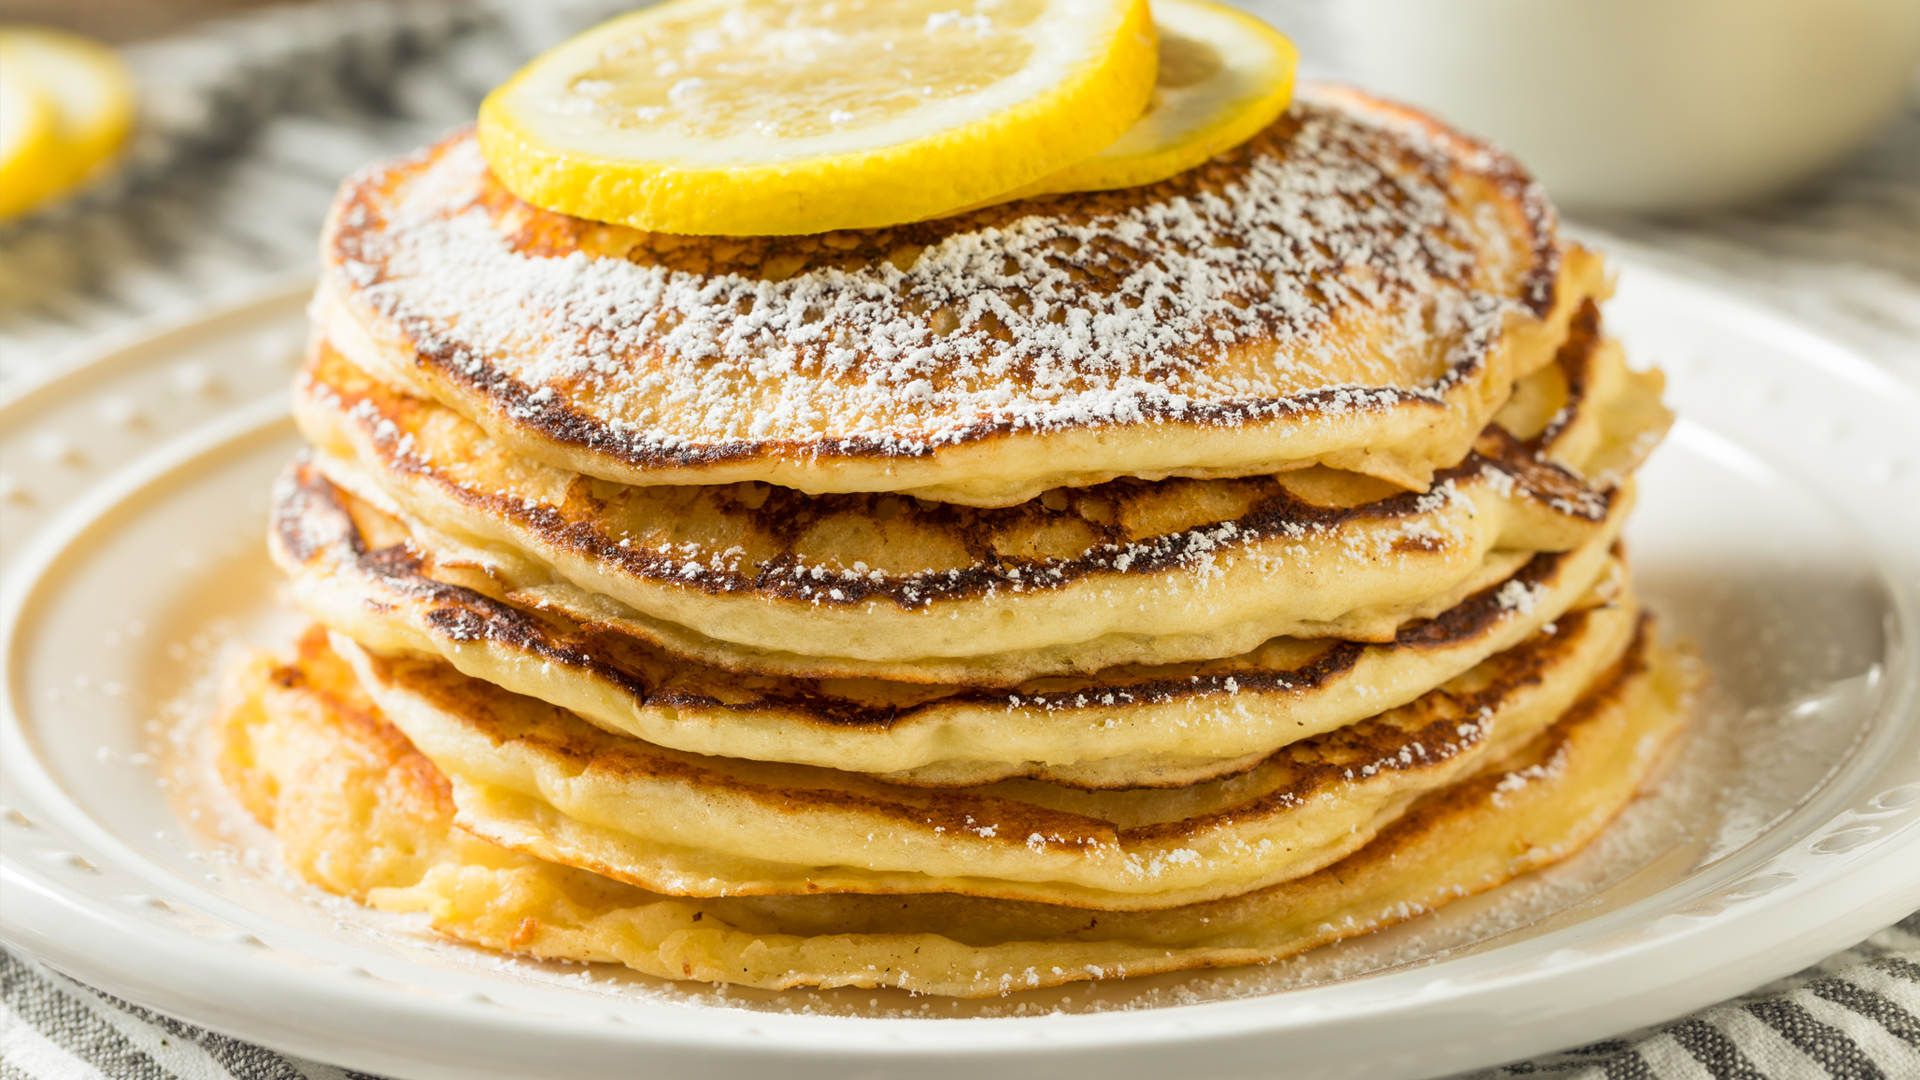 You can still do sweet weekend brunches when you’re gluten-free: make a stack of these fluffy ricotta pancakes